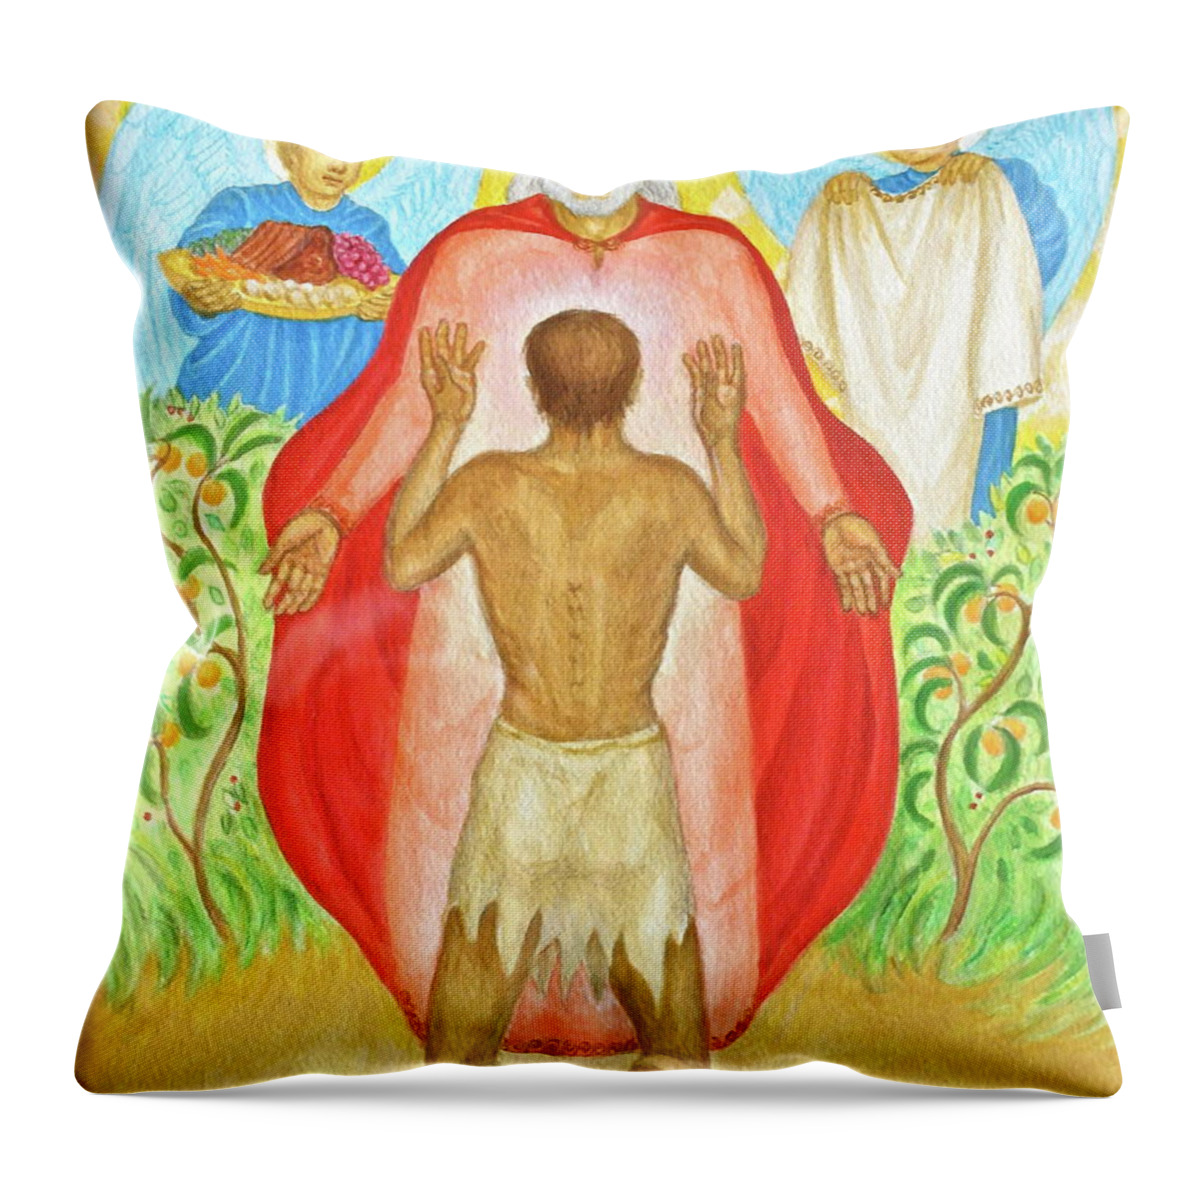 Prodigal Son Throw Pillow featuring the painting Return of the Prodigal Son by Michele Myers